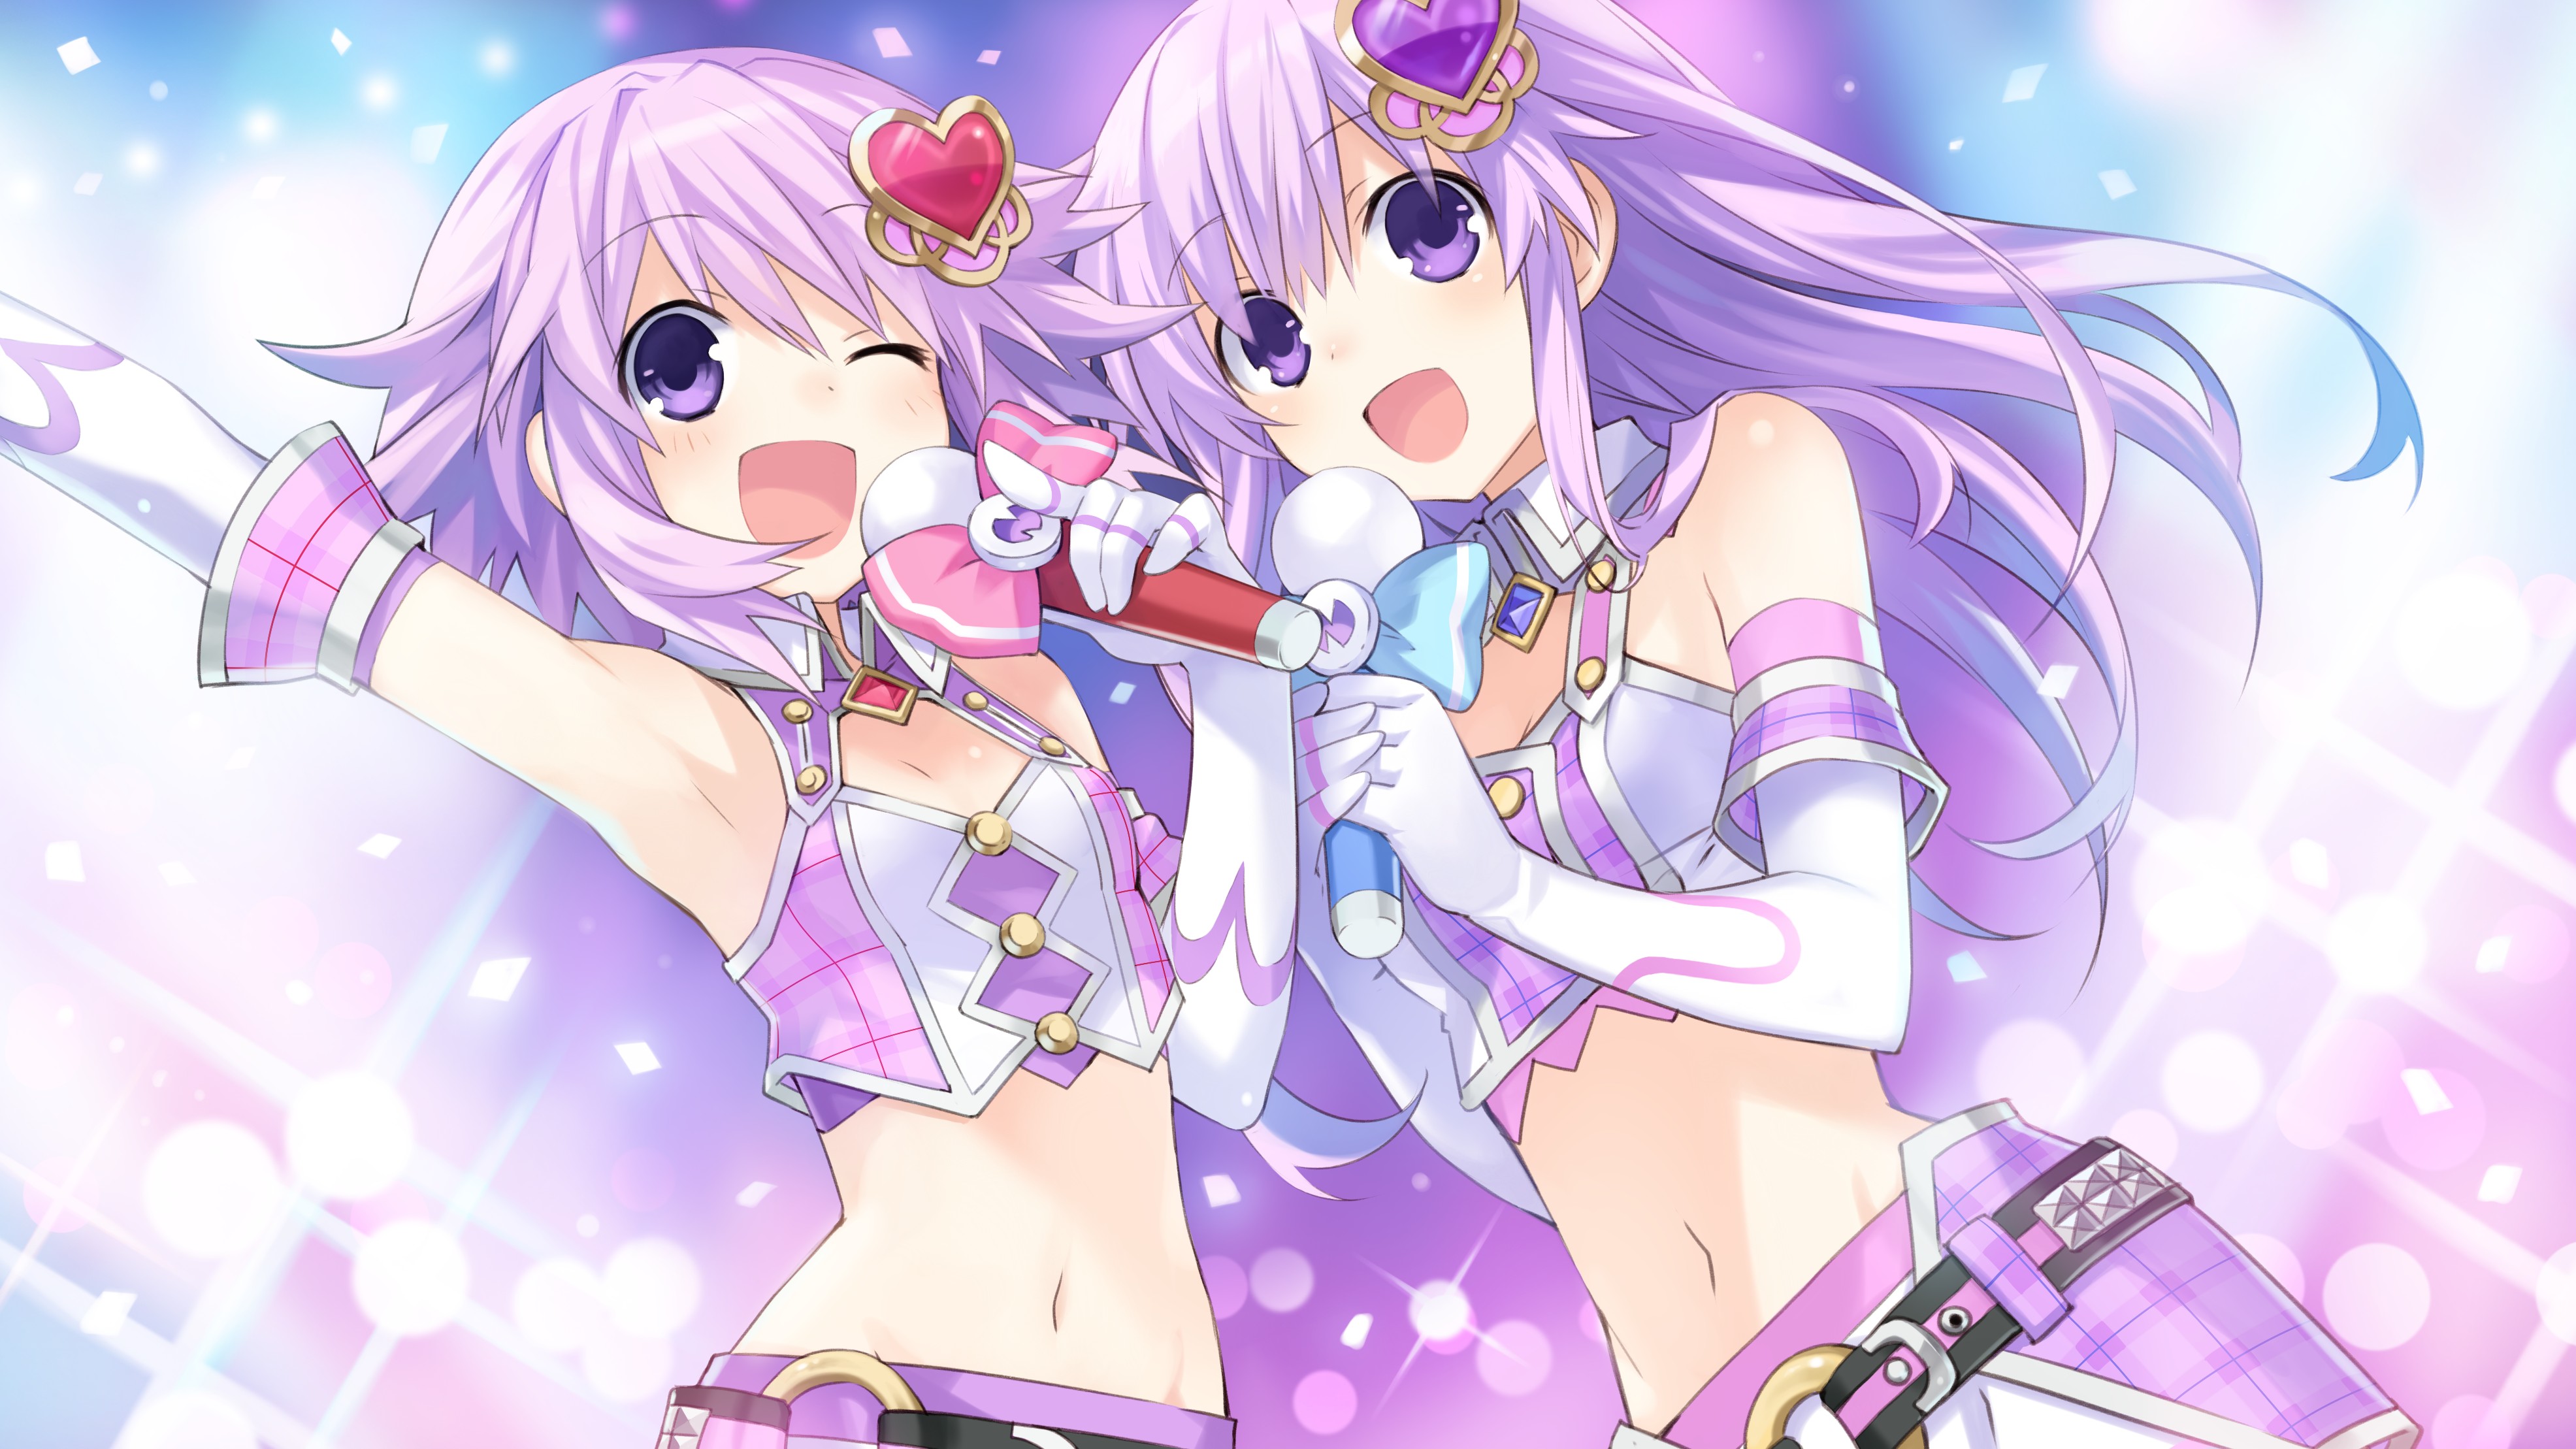 Hyperdimension Neptunia Anime Episode 1 This Episode We Start Our Viewing Of A New Series